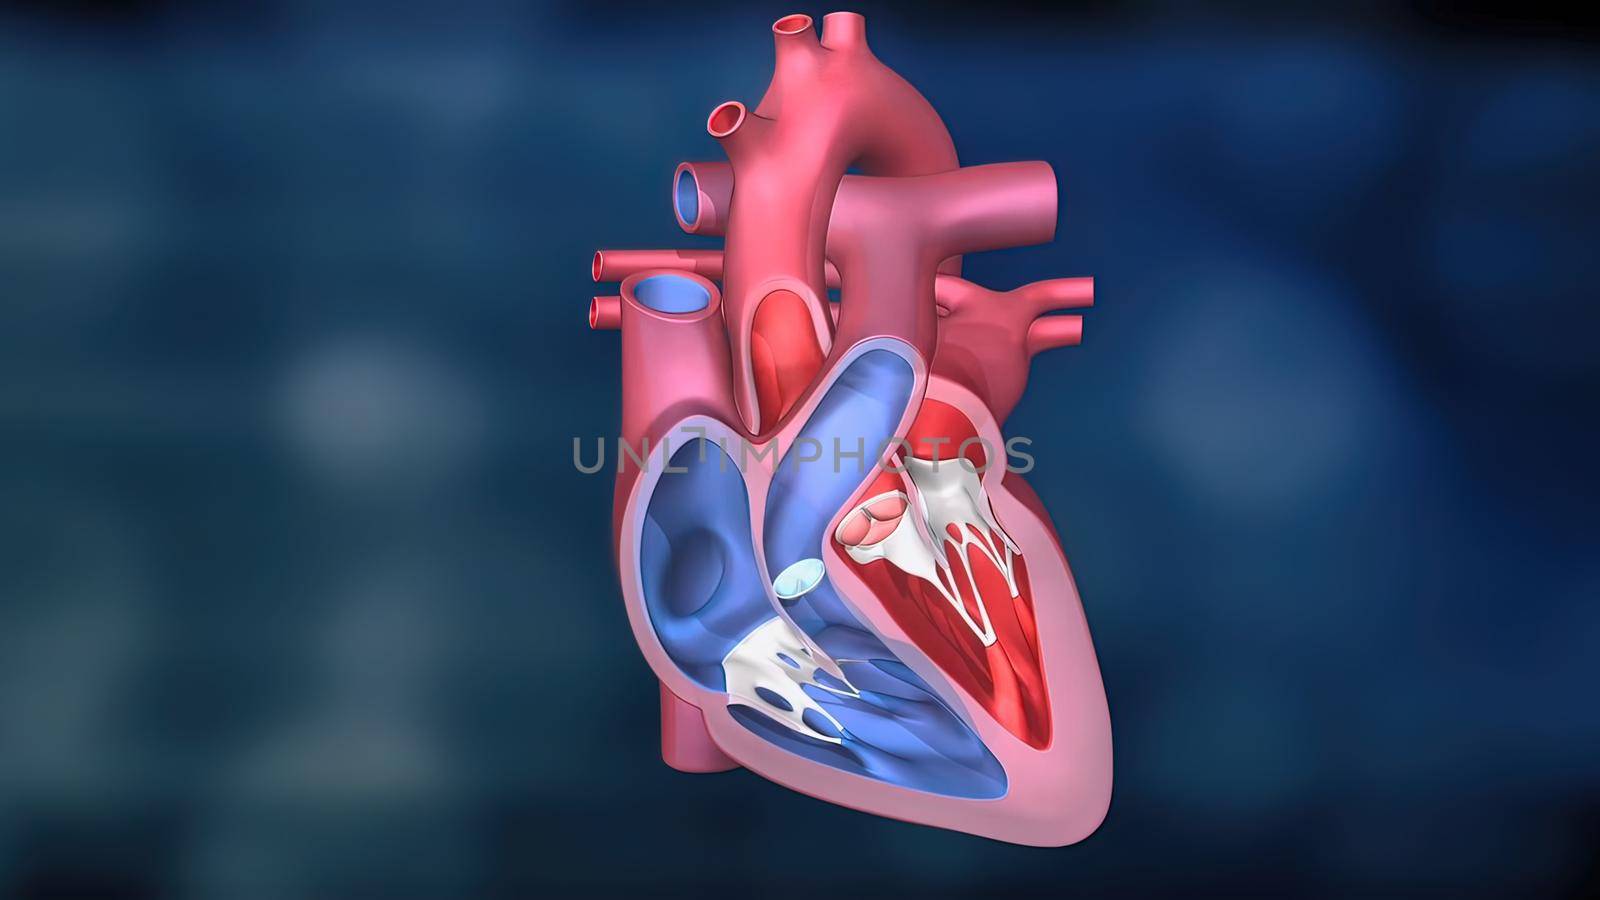 The Heart and Circulatory System by creativepic